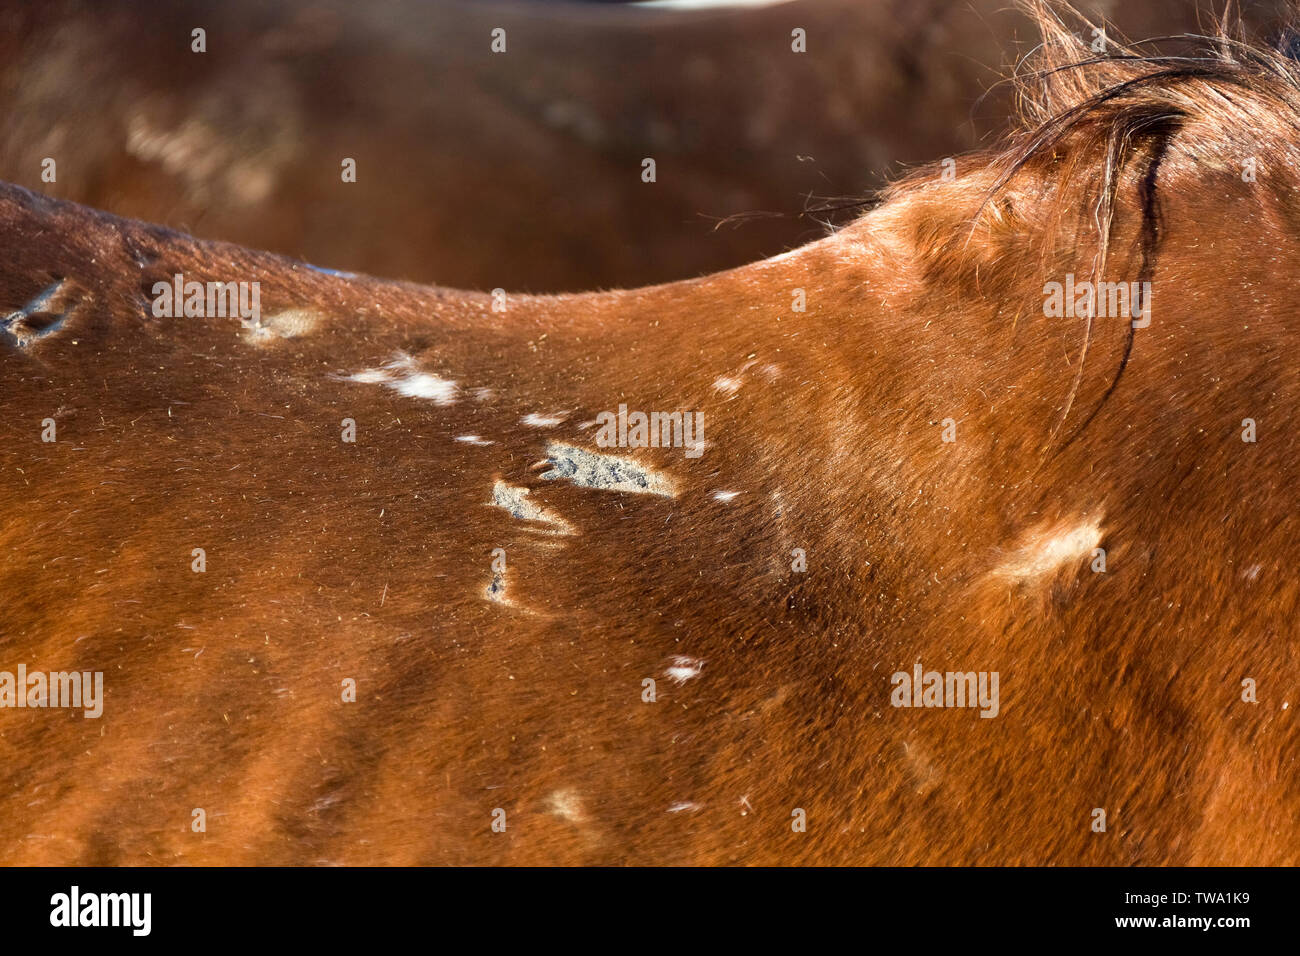 Domestic horse. Sore spots caused by saddle on the back of a chestnut mare. Egypt Stock Photo